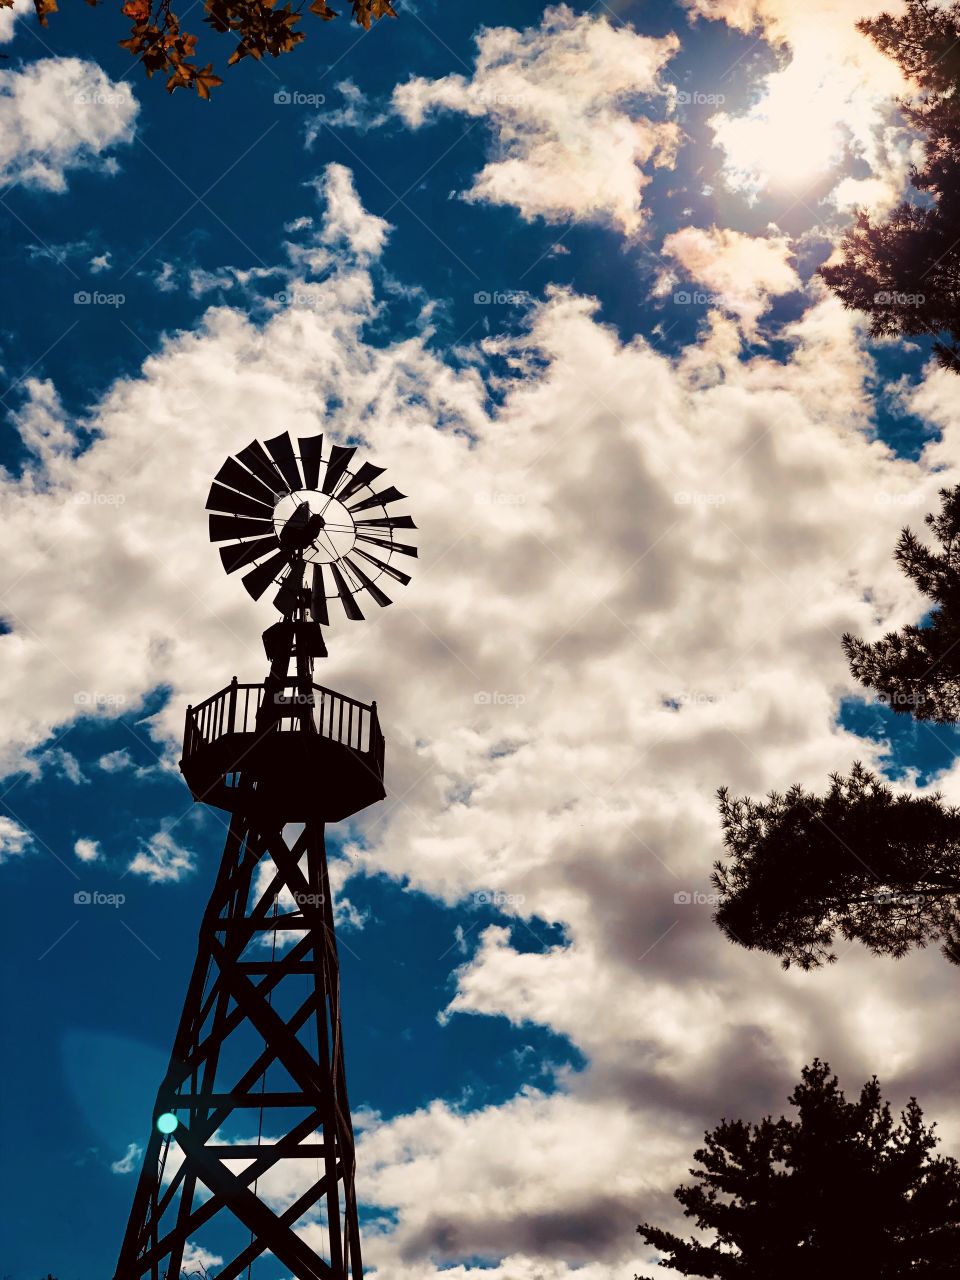 Windmill In The Sky, Windmill On The Farm, Windmill Framed With Trees, Windmills In New York, Windmill In The Clouds, Capturing The Magic, Silhouette Of A Windmill, Silhouette In The Sky